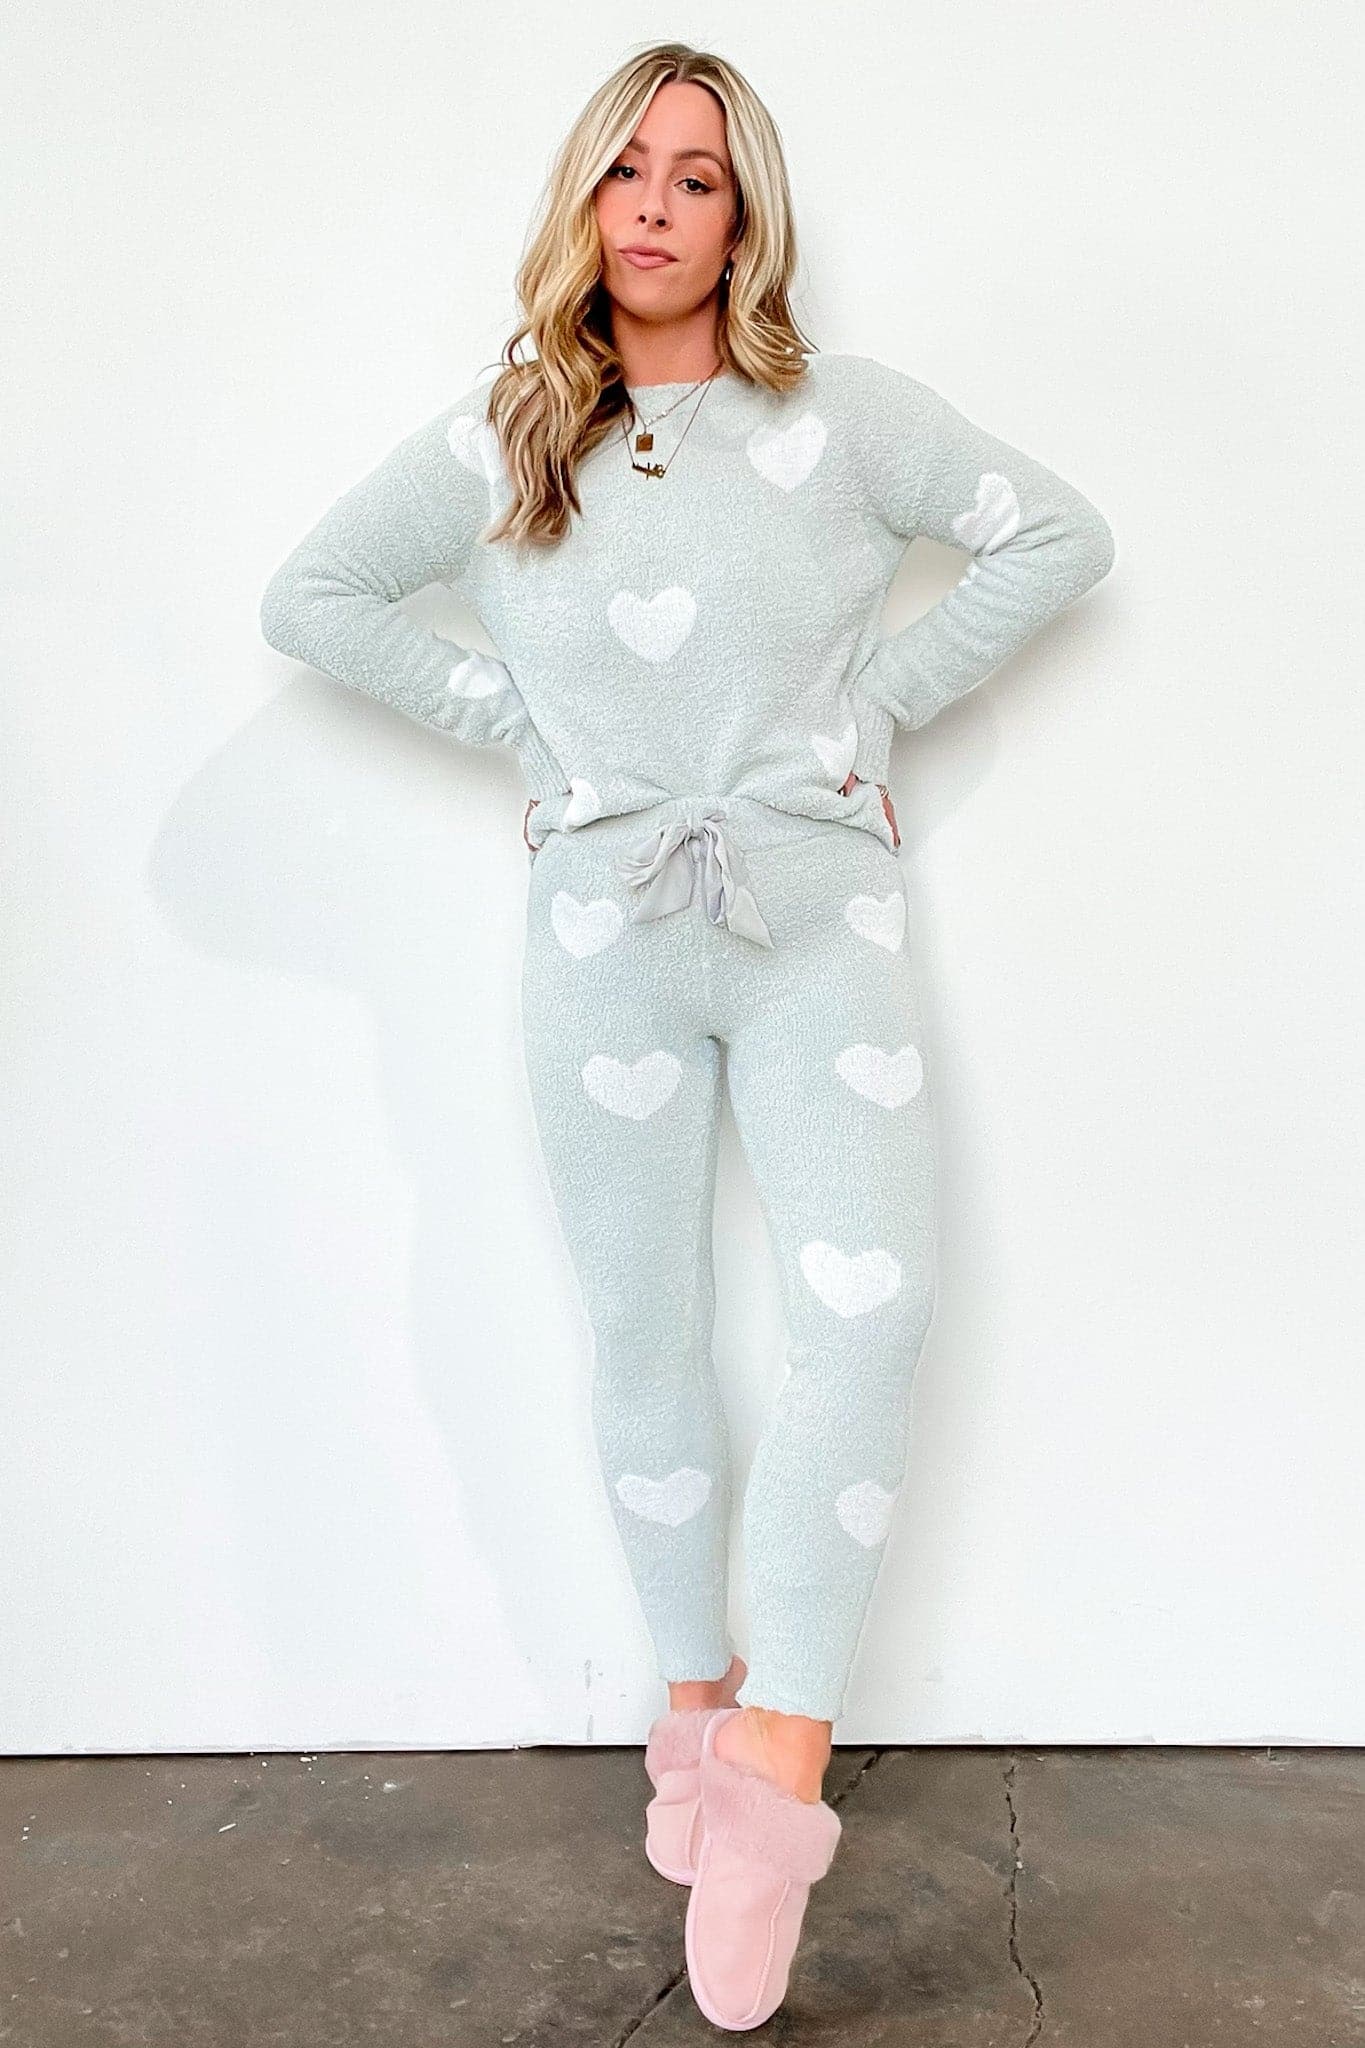  Have a Heart to Heart Print Sweater Knit Leggings - FINAL SALE - Madison and Mallory